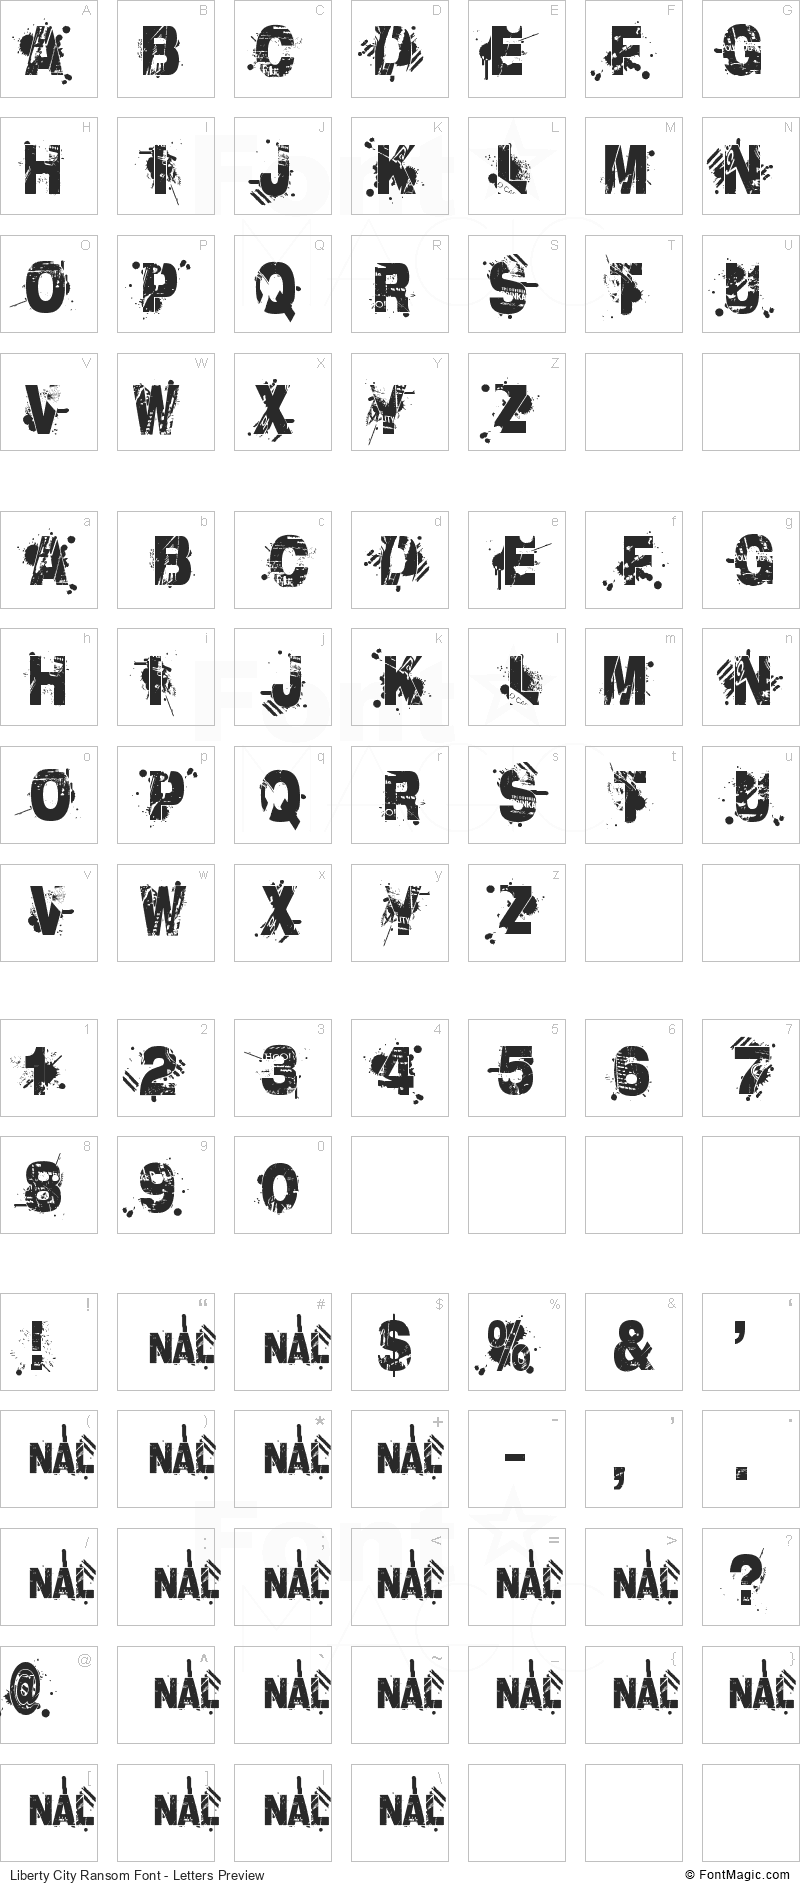 Liberty City Ransom Font - All Latters Preview Chart